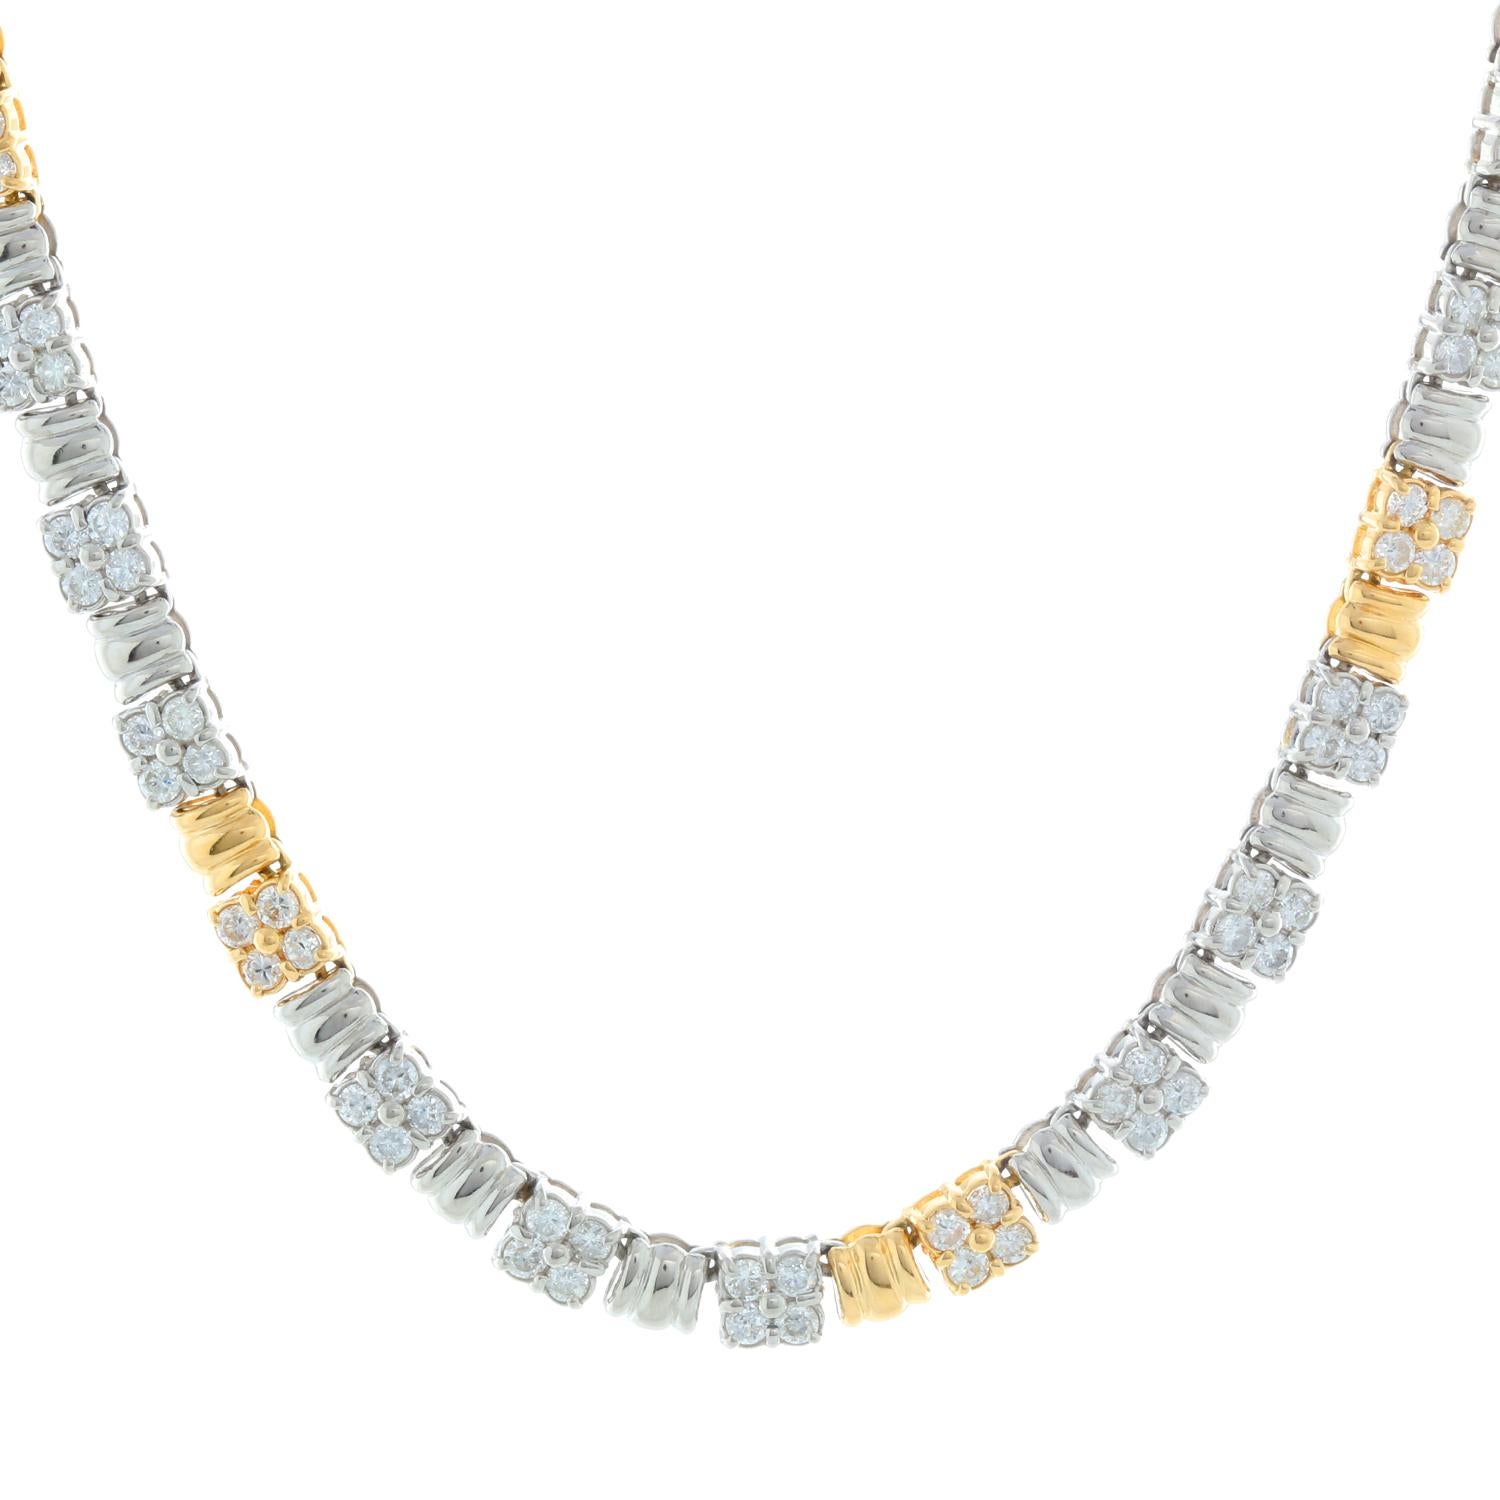 Platinum and Yellow Gold Diamond Necklace - Alternating links between Platinum and 18K Yellow Gold with diamonds. Total carat weight is 6.24. Total weigh 36.1 grams. Total length 15 inches.